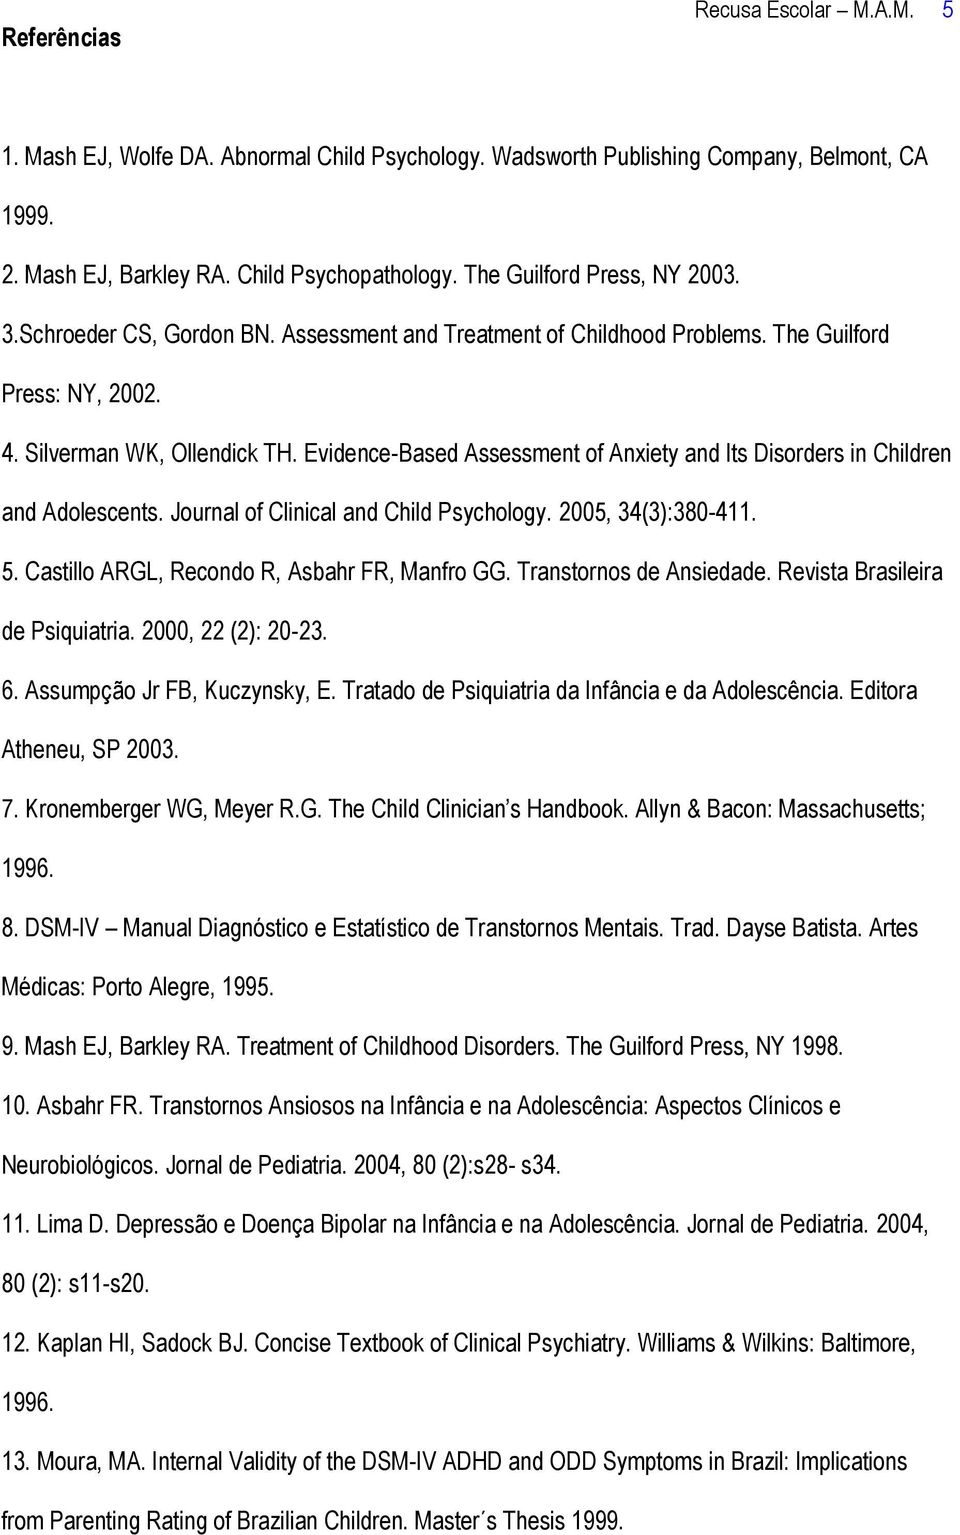 Evidence-Based Assessment of Anxiety and Its Disorders in Children and Adolescents. Journal of Clinical and Child Psychology. 2005, 34(3):380-411. 5. Castillo ARGL, Recondo R, Asbahr FR, Manfro GG.